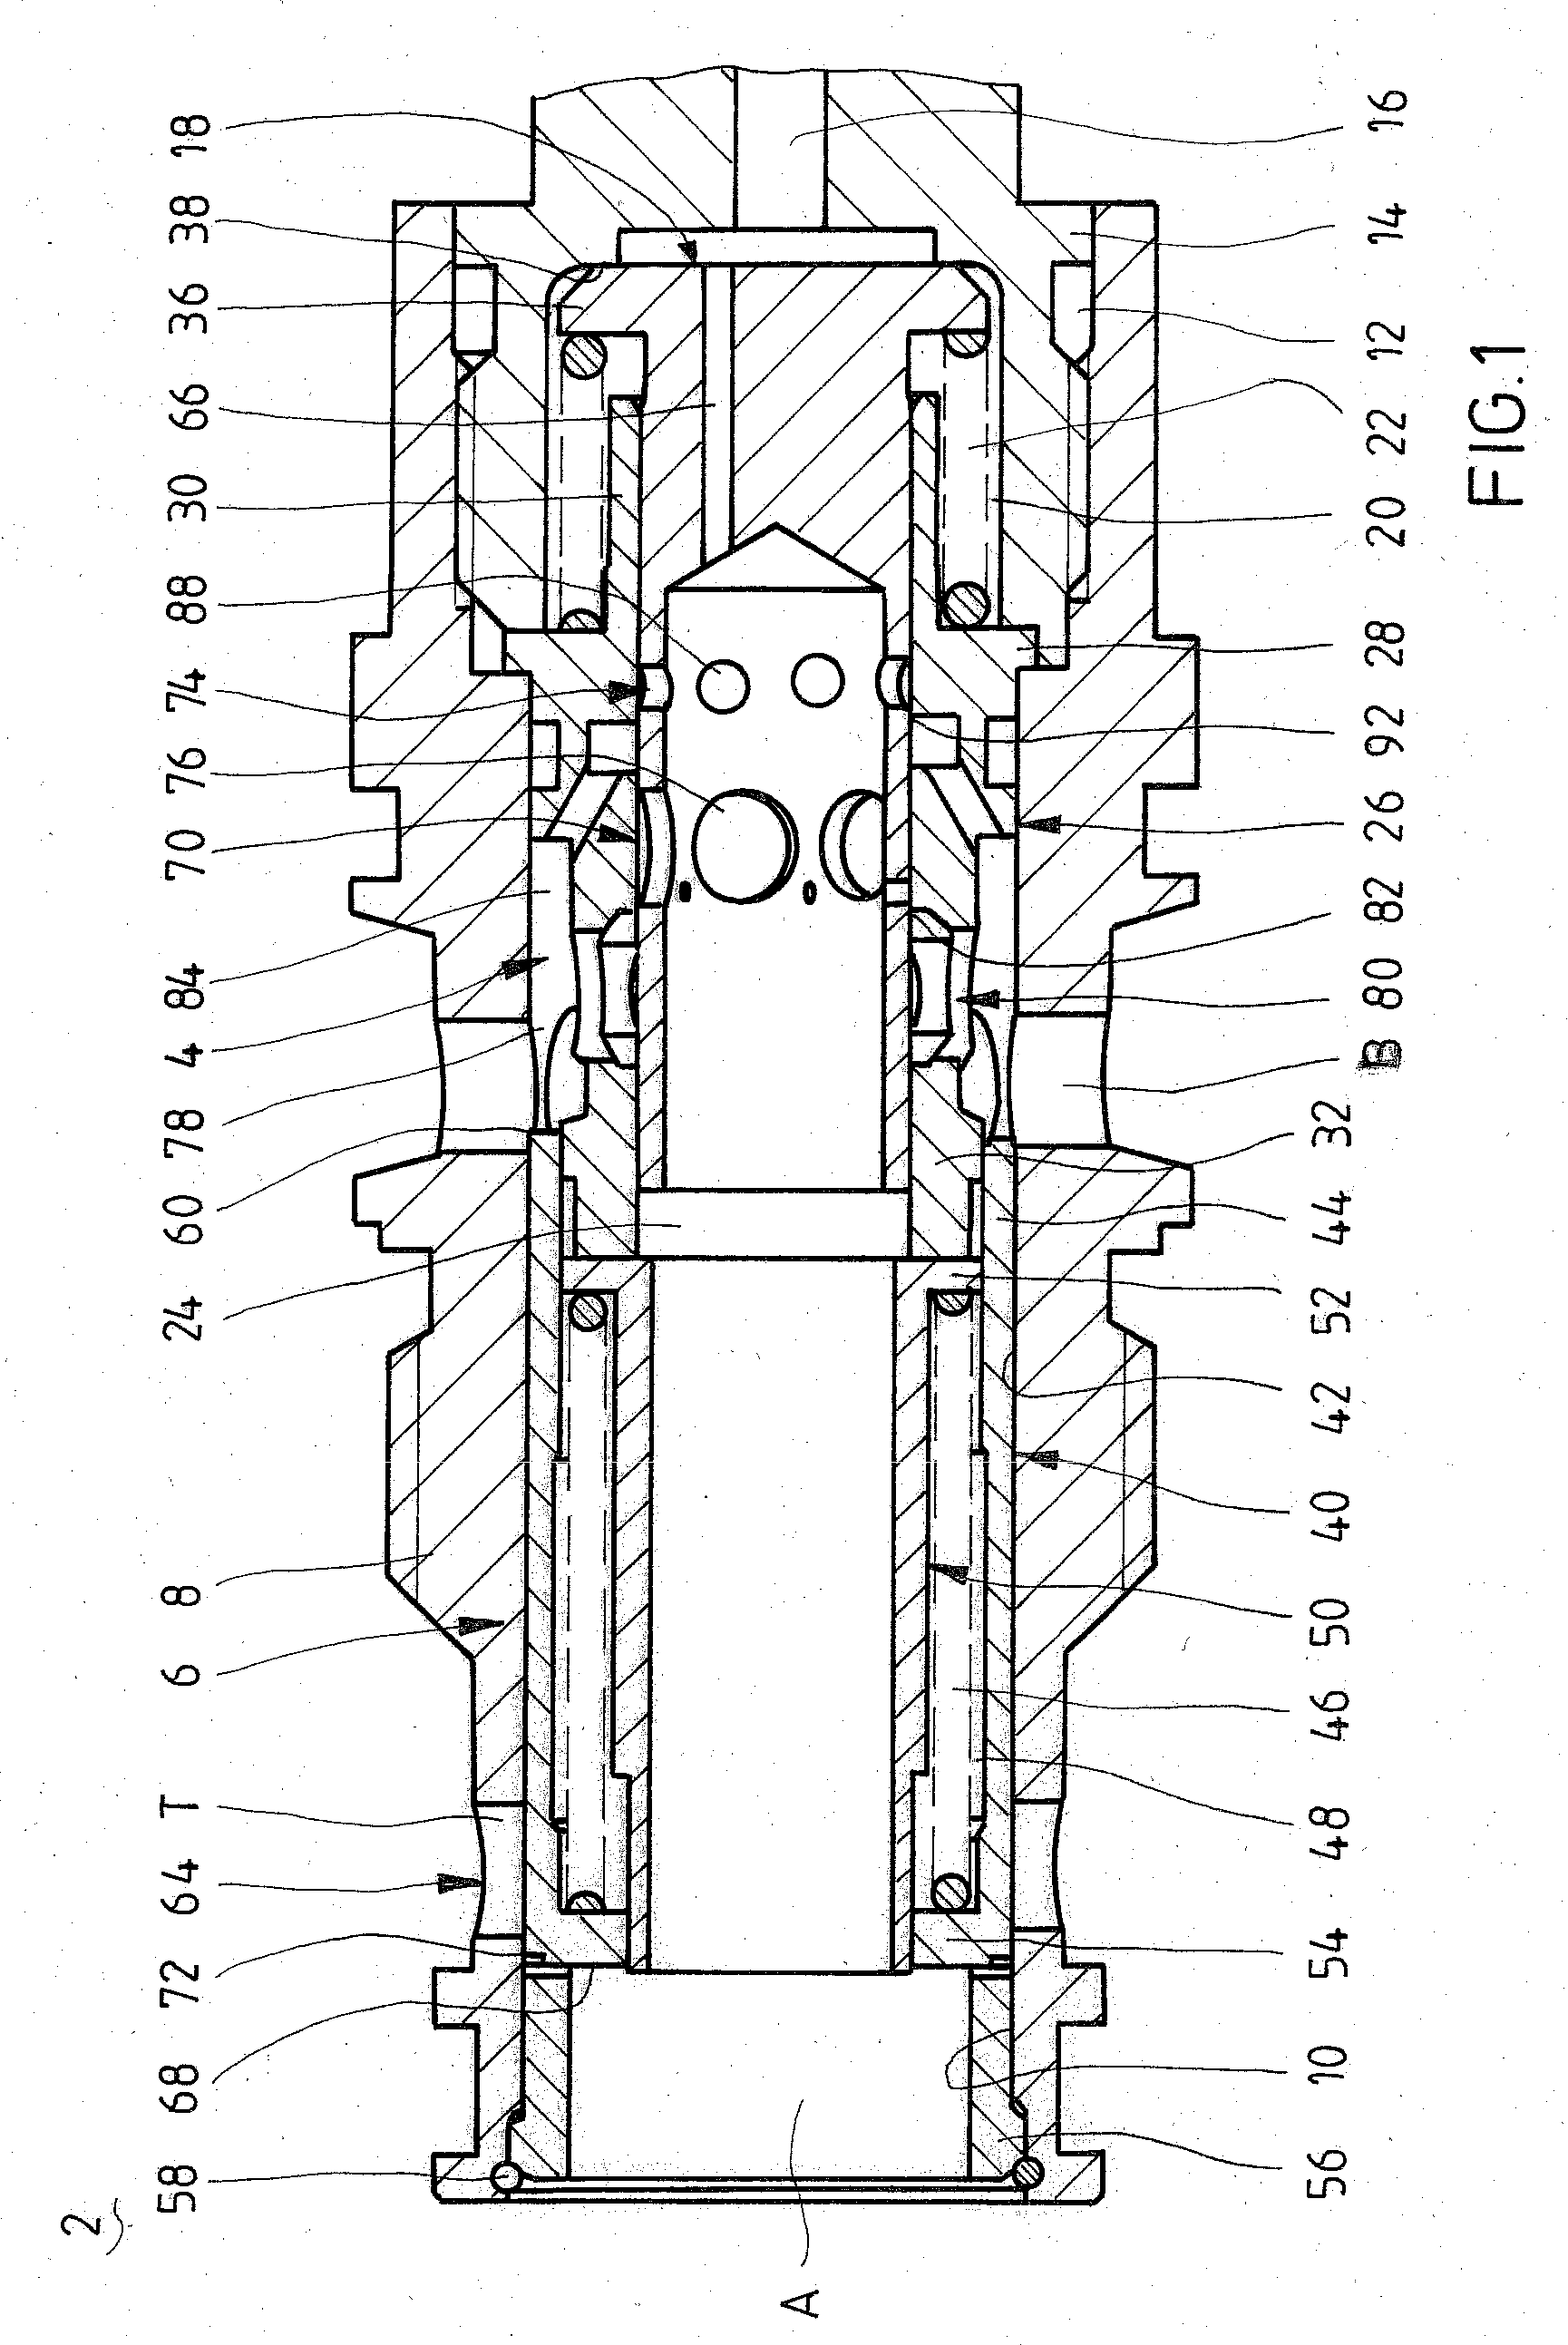 Directional or flow control valve